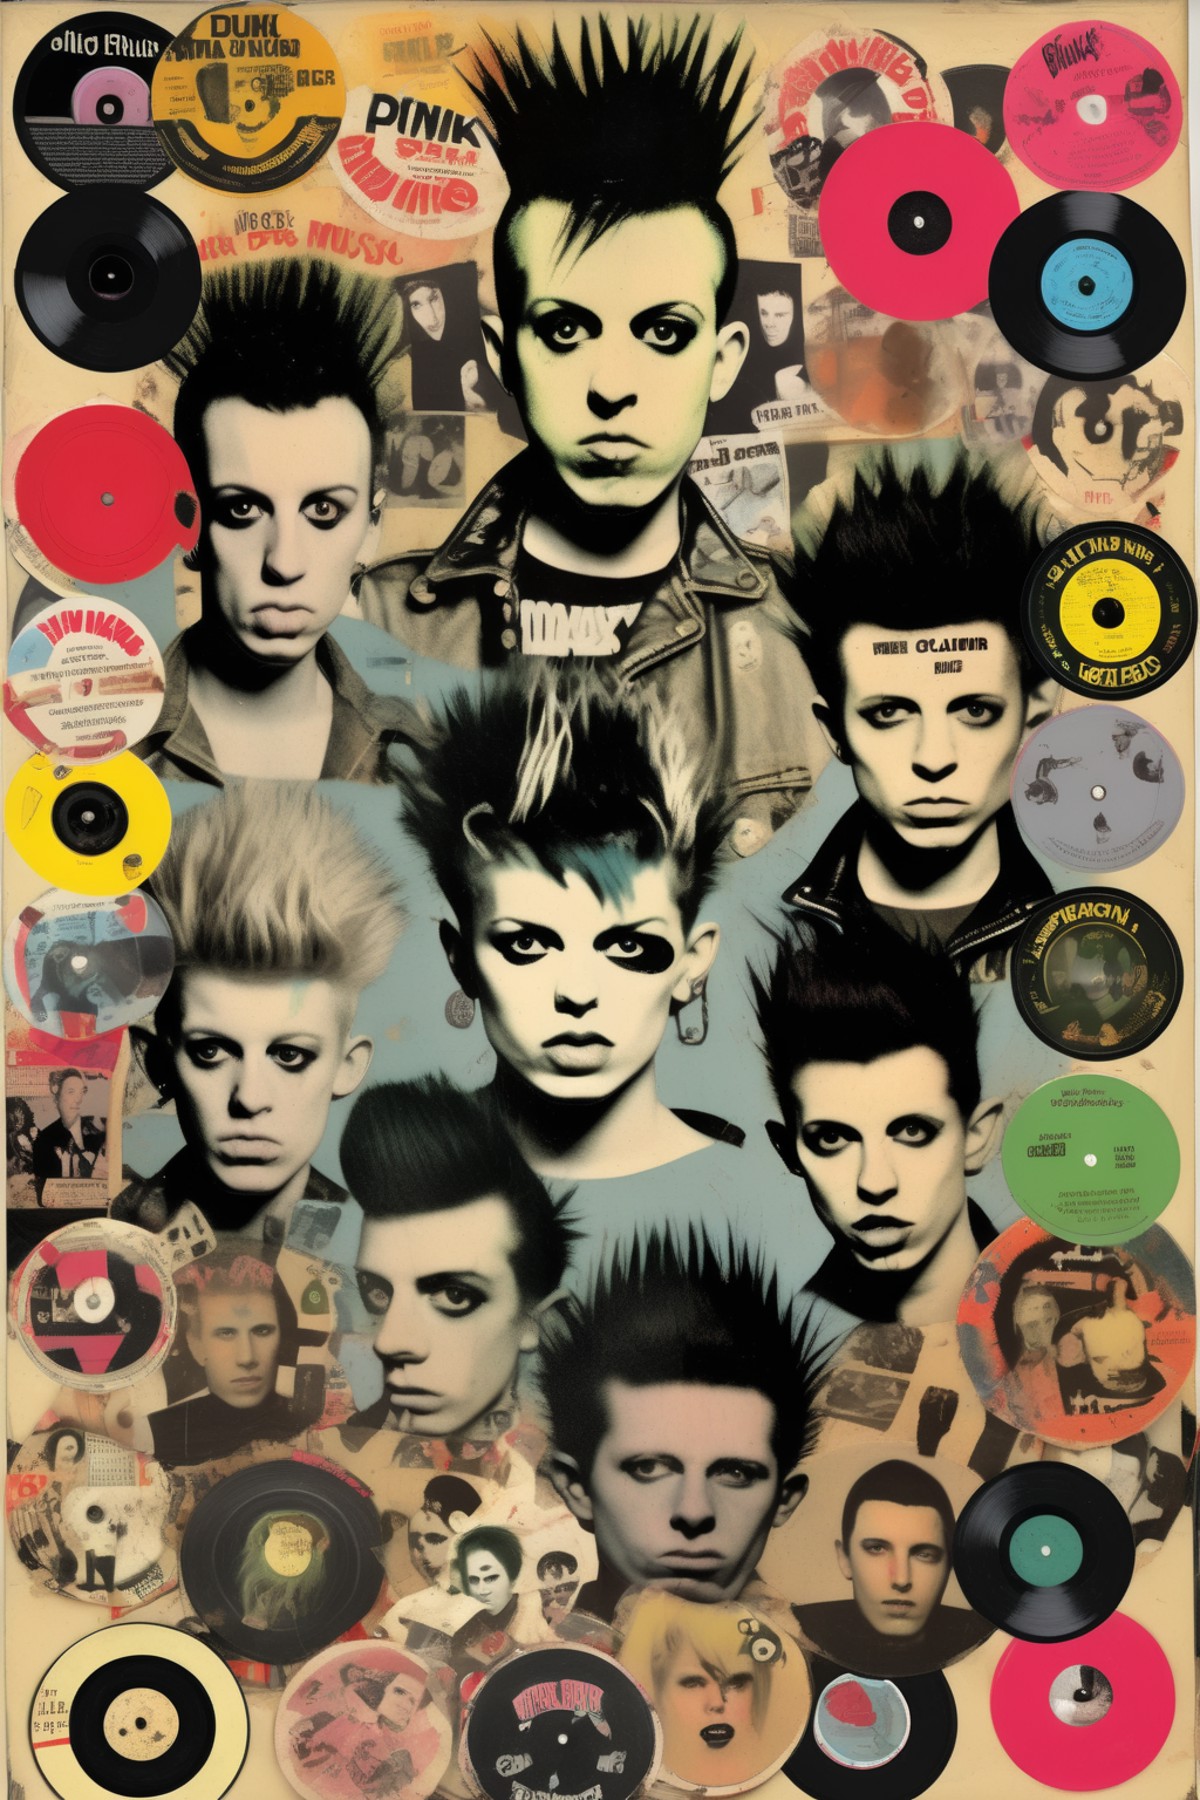 <lora:Punk Collage:1>Punk Collage - A vinyl record with punk band stickers on the cover, highlighting the punk music and v...